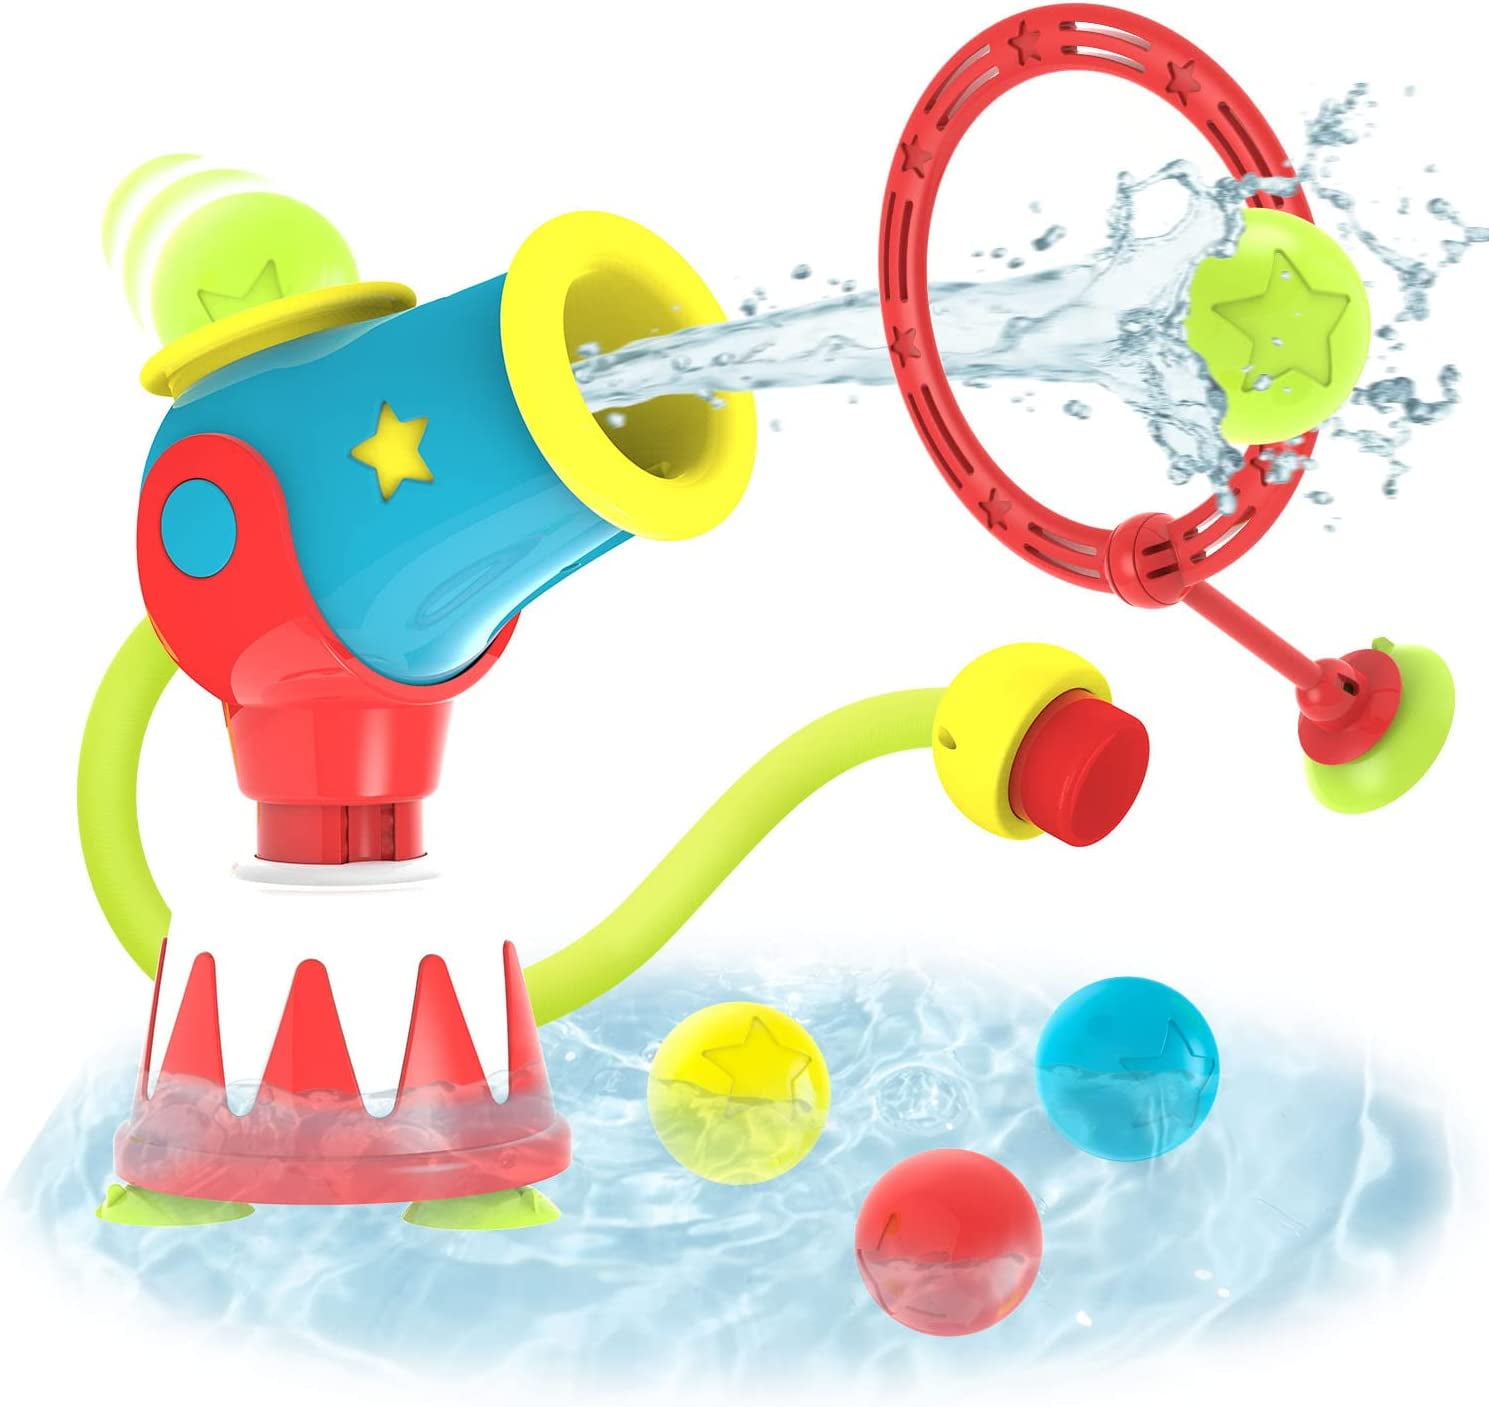 Yookidoo Toddler Bath Toy - Water Cannon Ball Blaster Shooting Game for Bathtub - 5 Balls Plus Target Hoop , Kinetic Hand-Powered Pump (Ages 3-6)